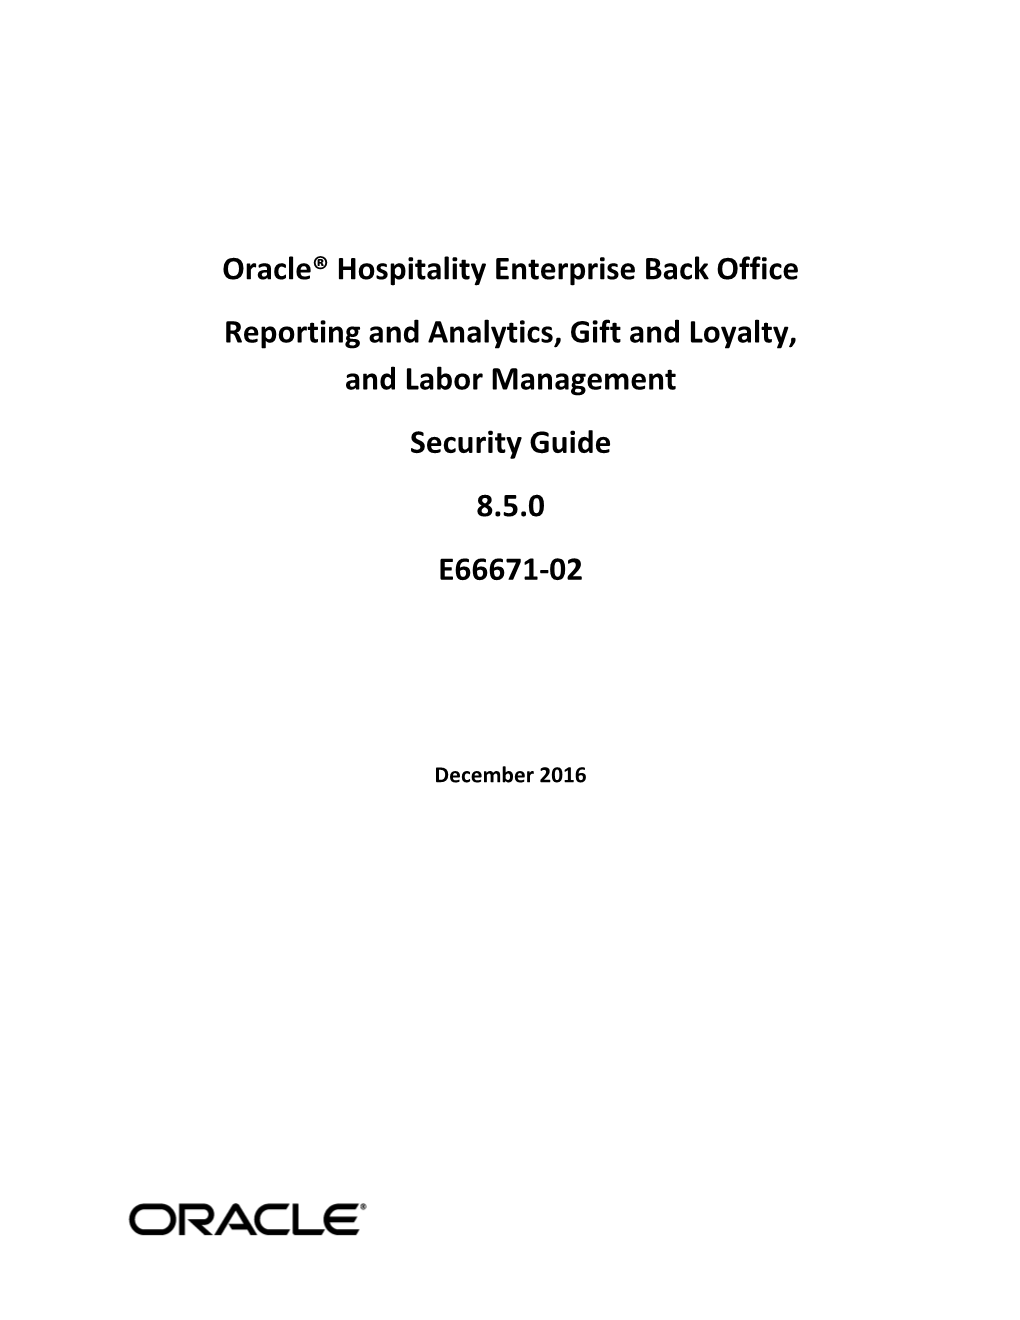 Oracle® Hospitality Enterprise Back Office Reporting and Analytics, Gift and Loyalty, and Labor Management Security Guide 8.5.0